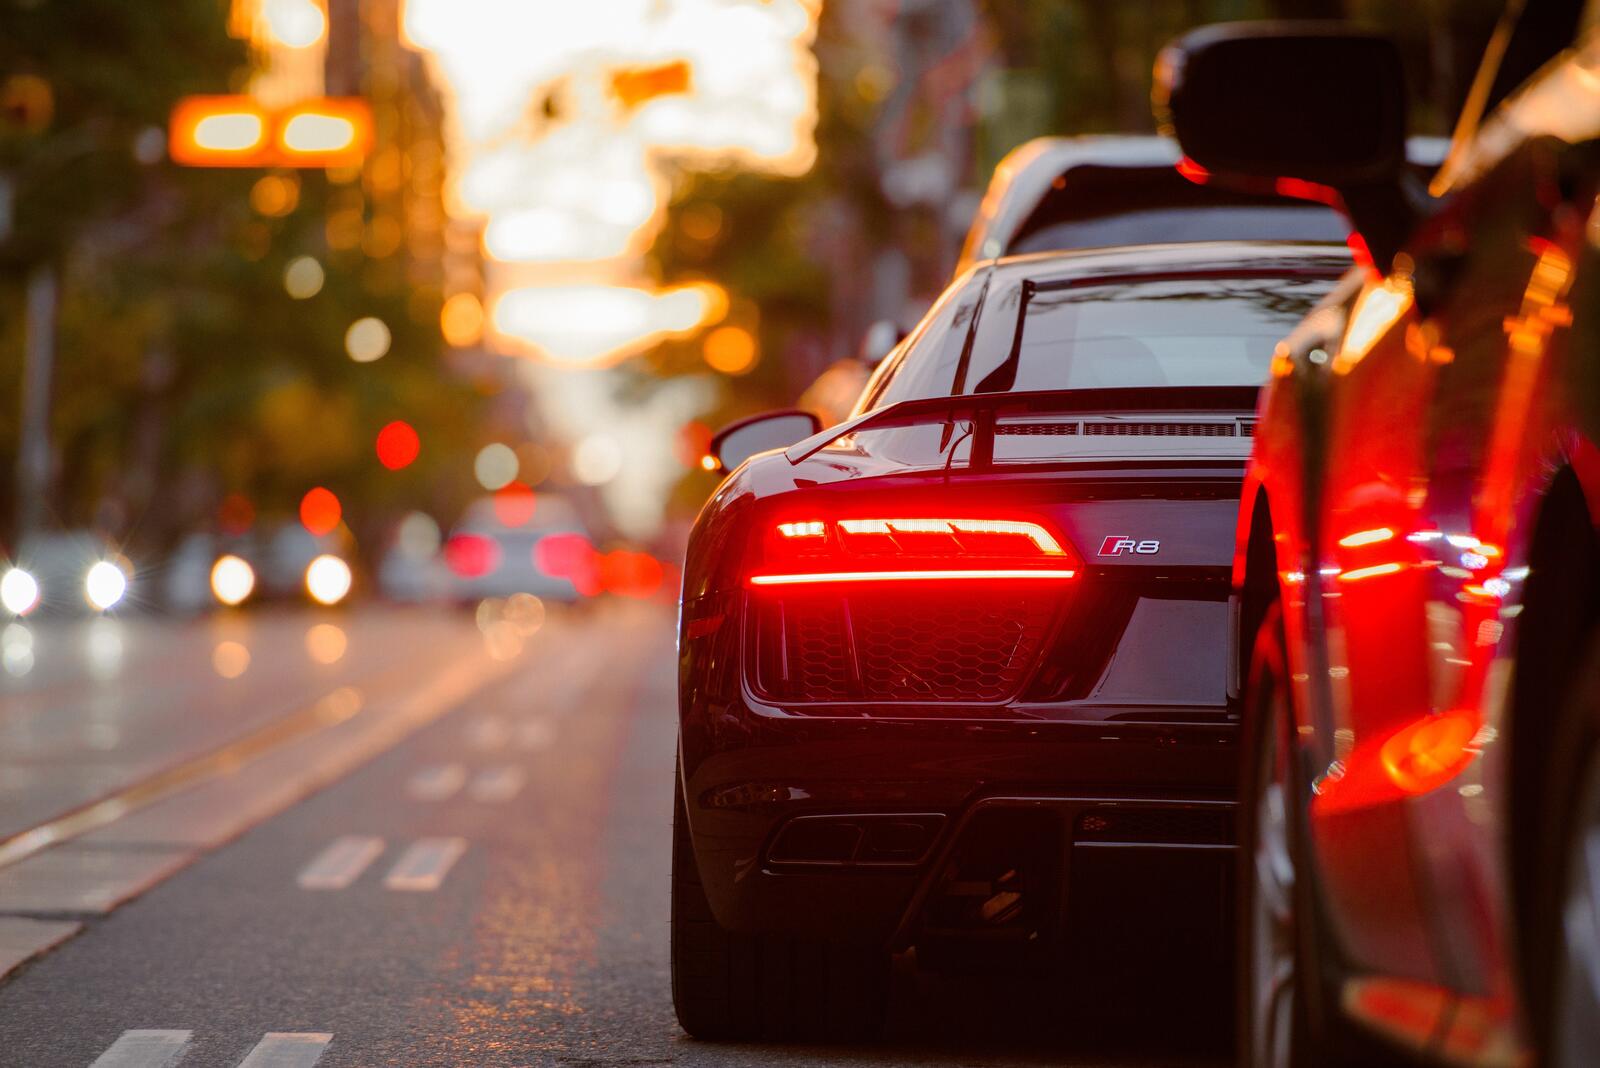 Wallpapers view from behind Audi R8 Headlight boke on the desktop